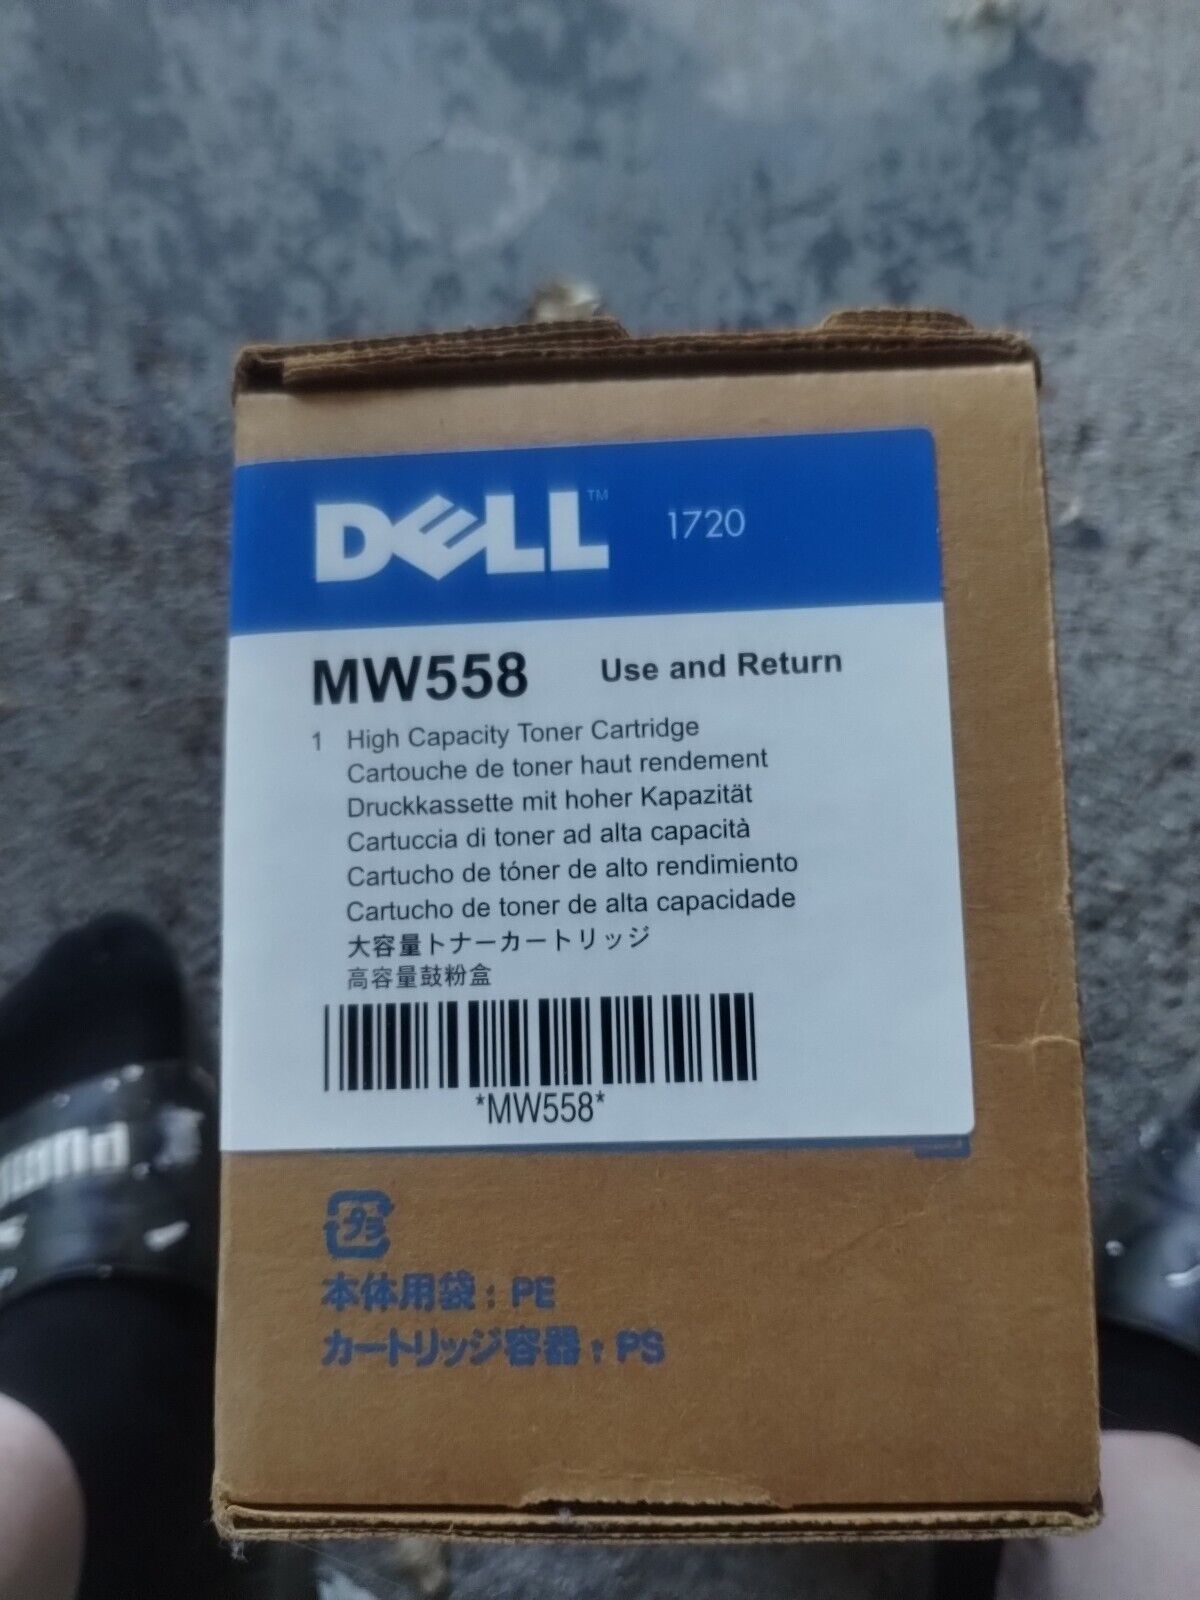 Two Genuine Dell MW558 1720 Black Toner Cartridge - 6000 Page Yield New Sealed.